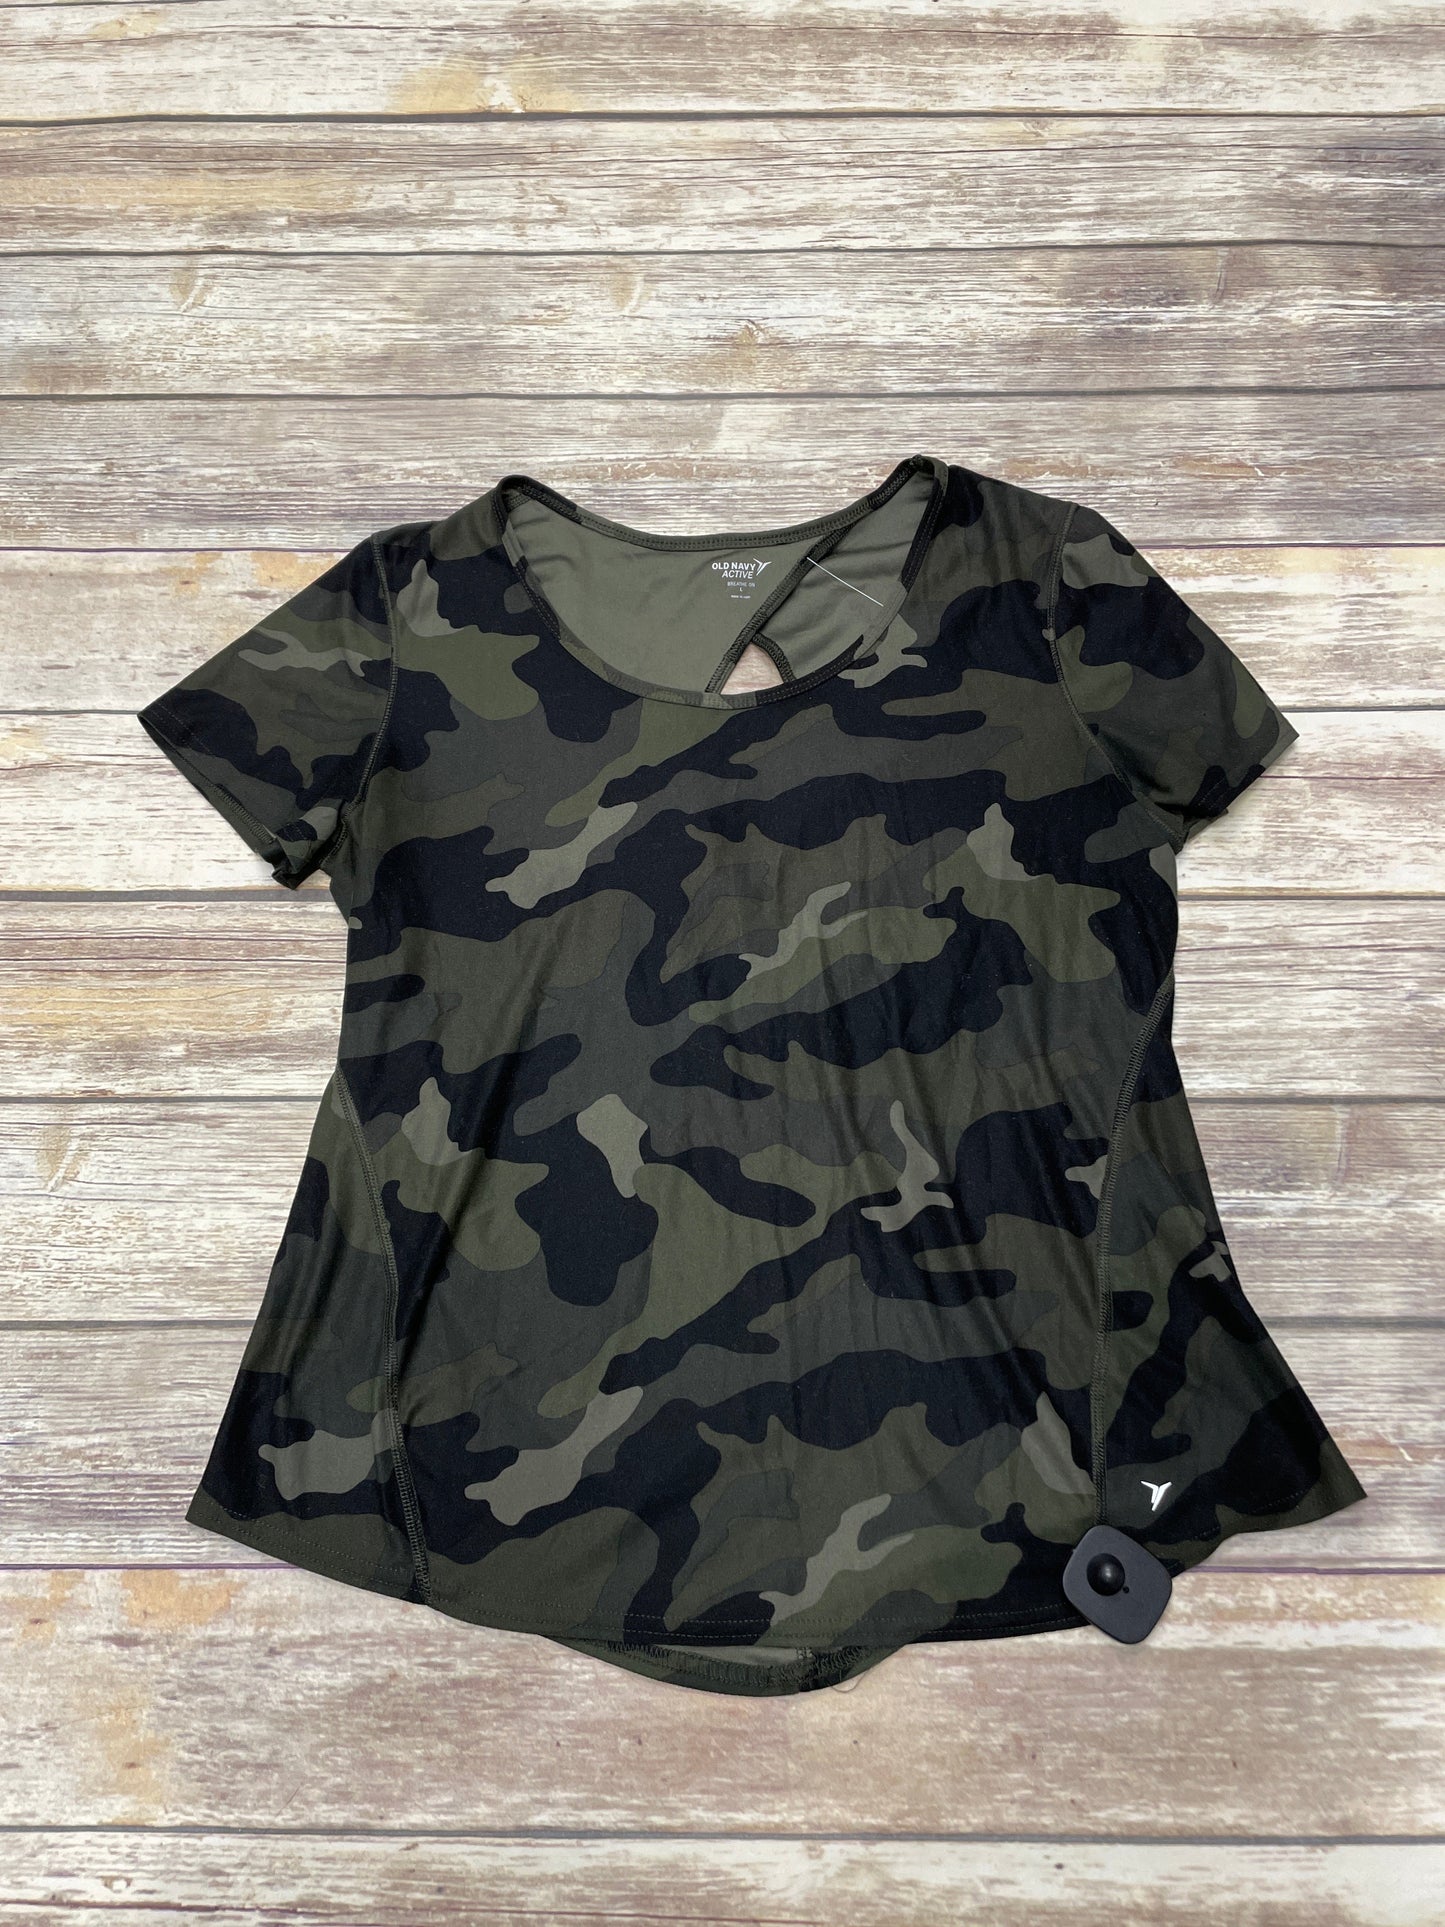 Camouflage Print Athletic Top Short Sleeve Old Navy, Size L